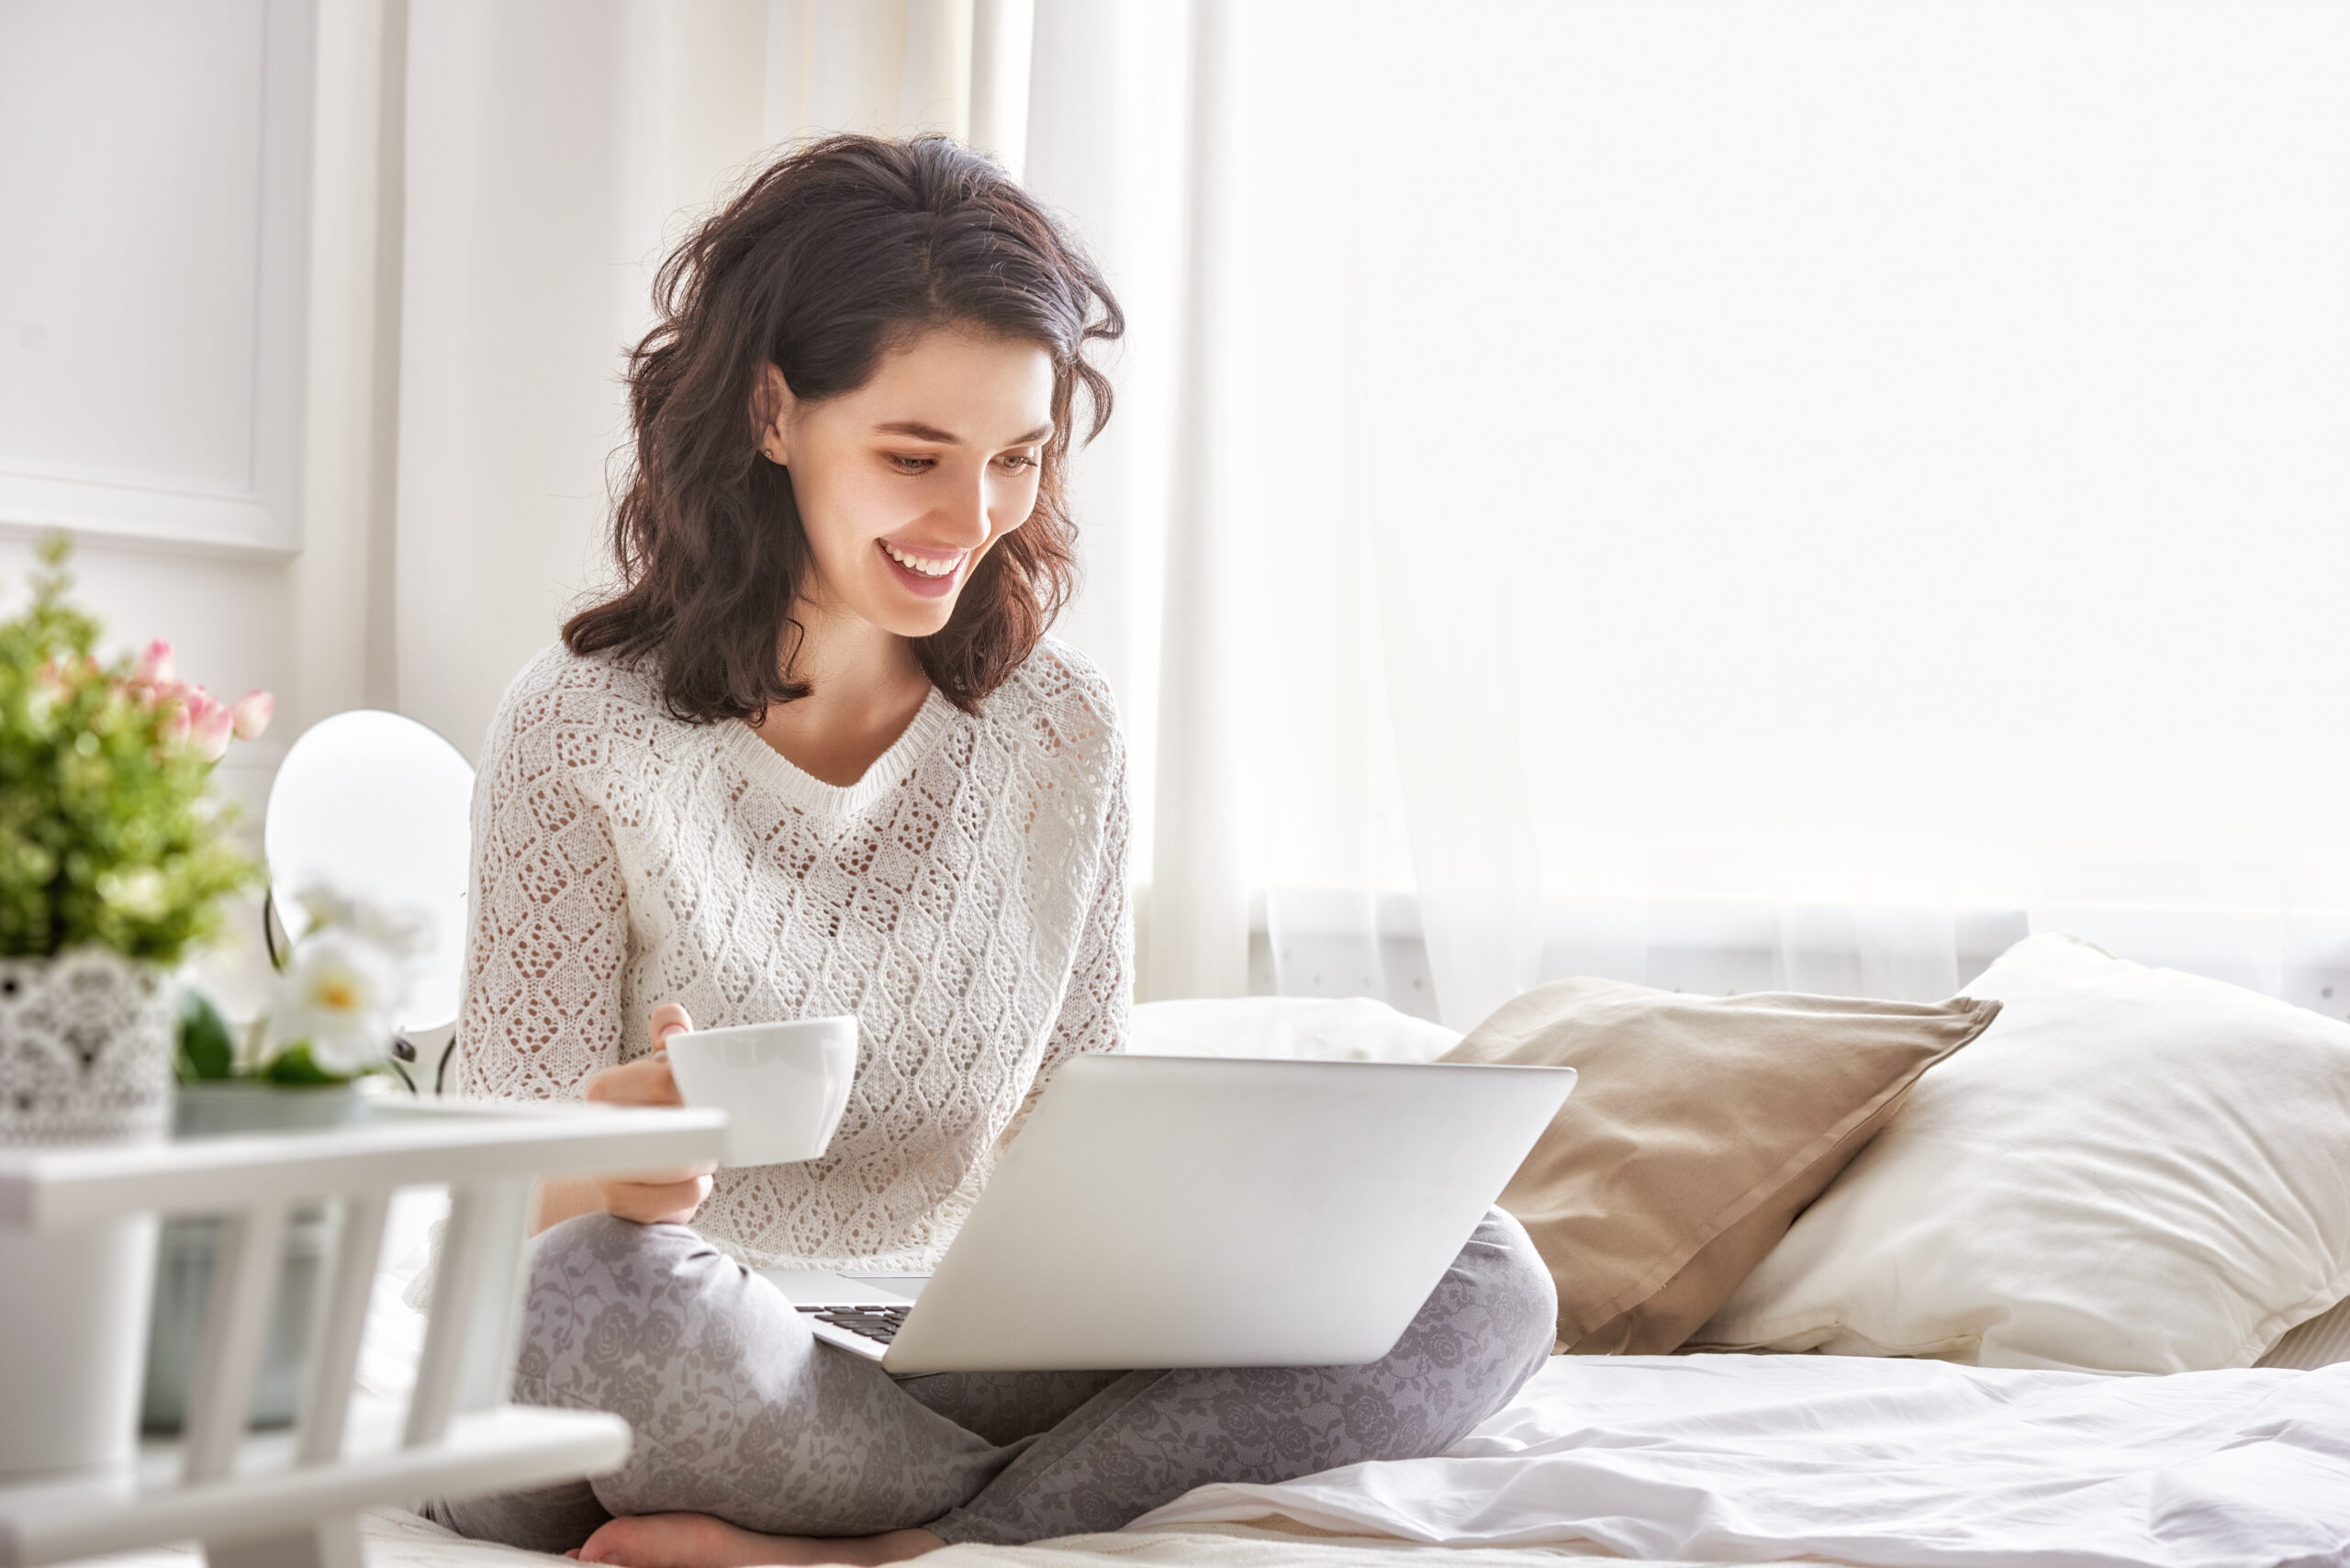 smiling woman holding a cup in front of a laptop